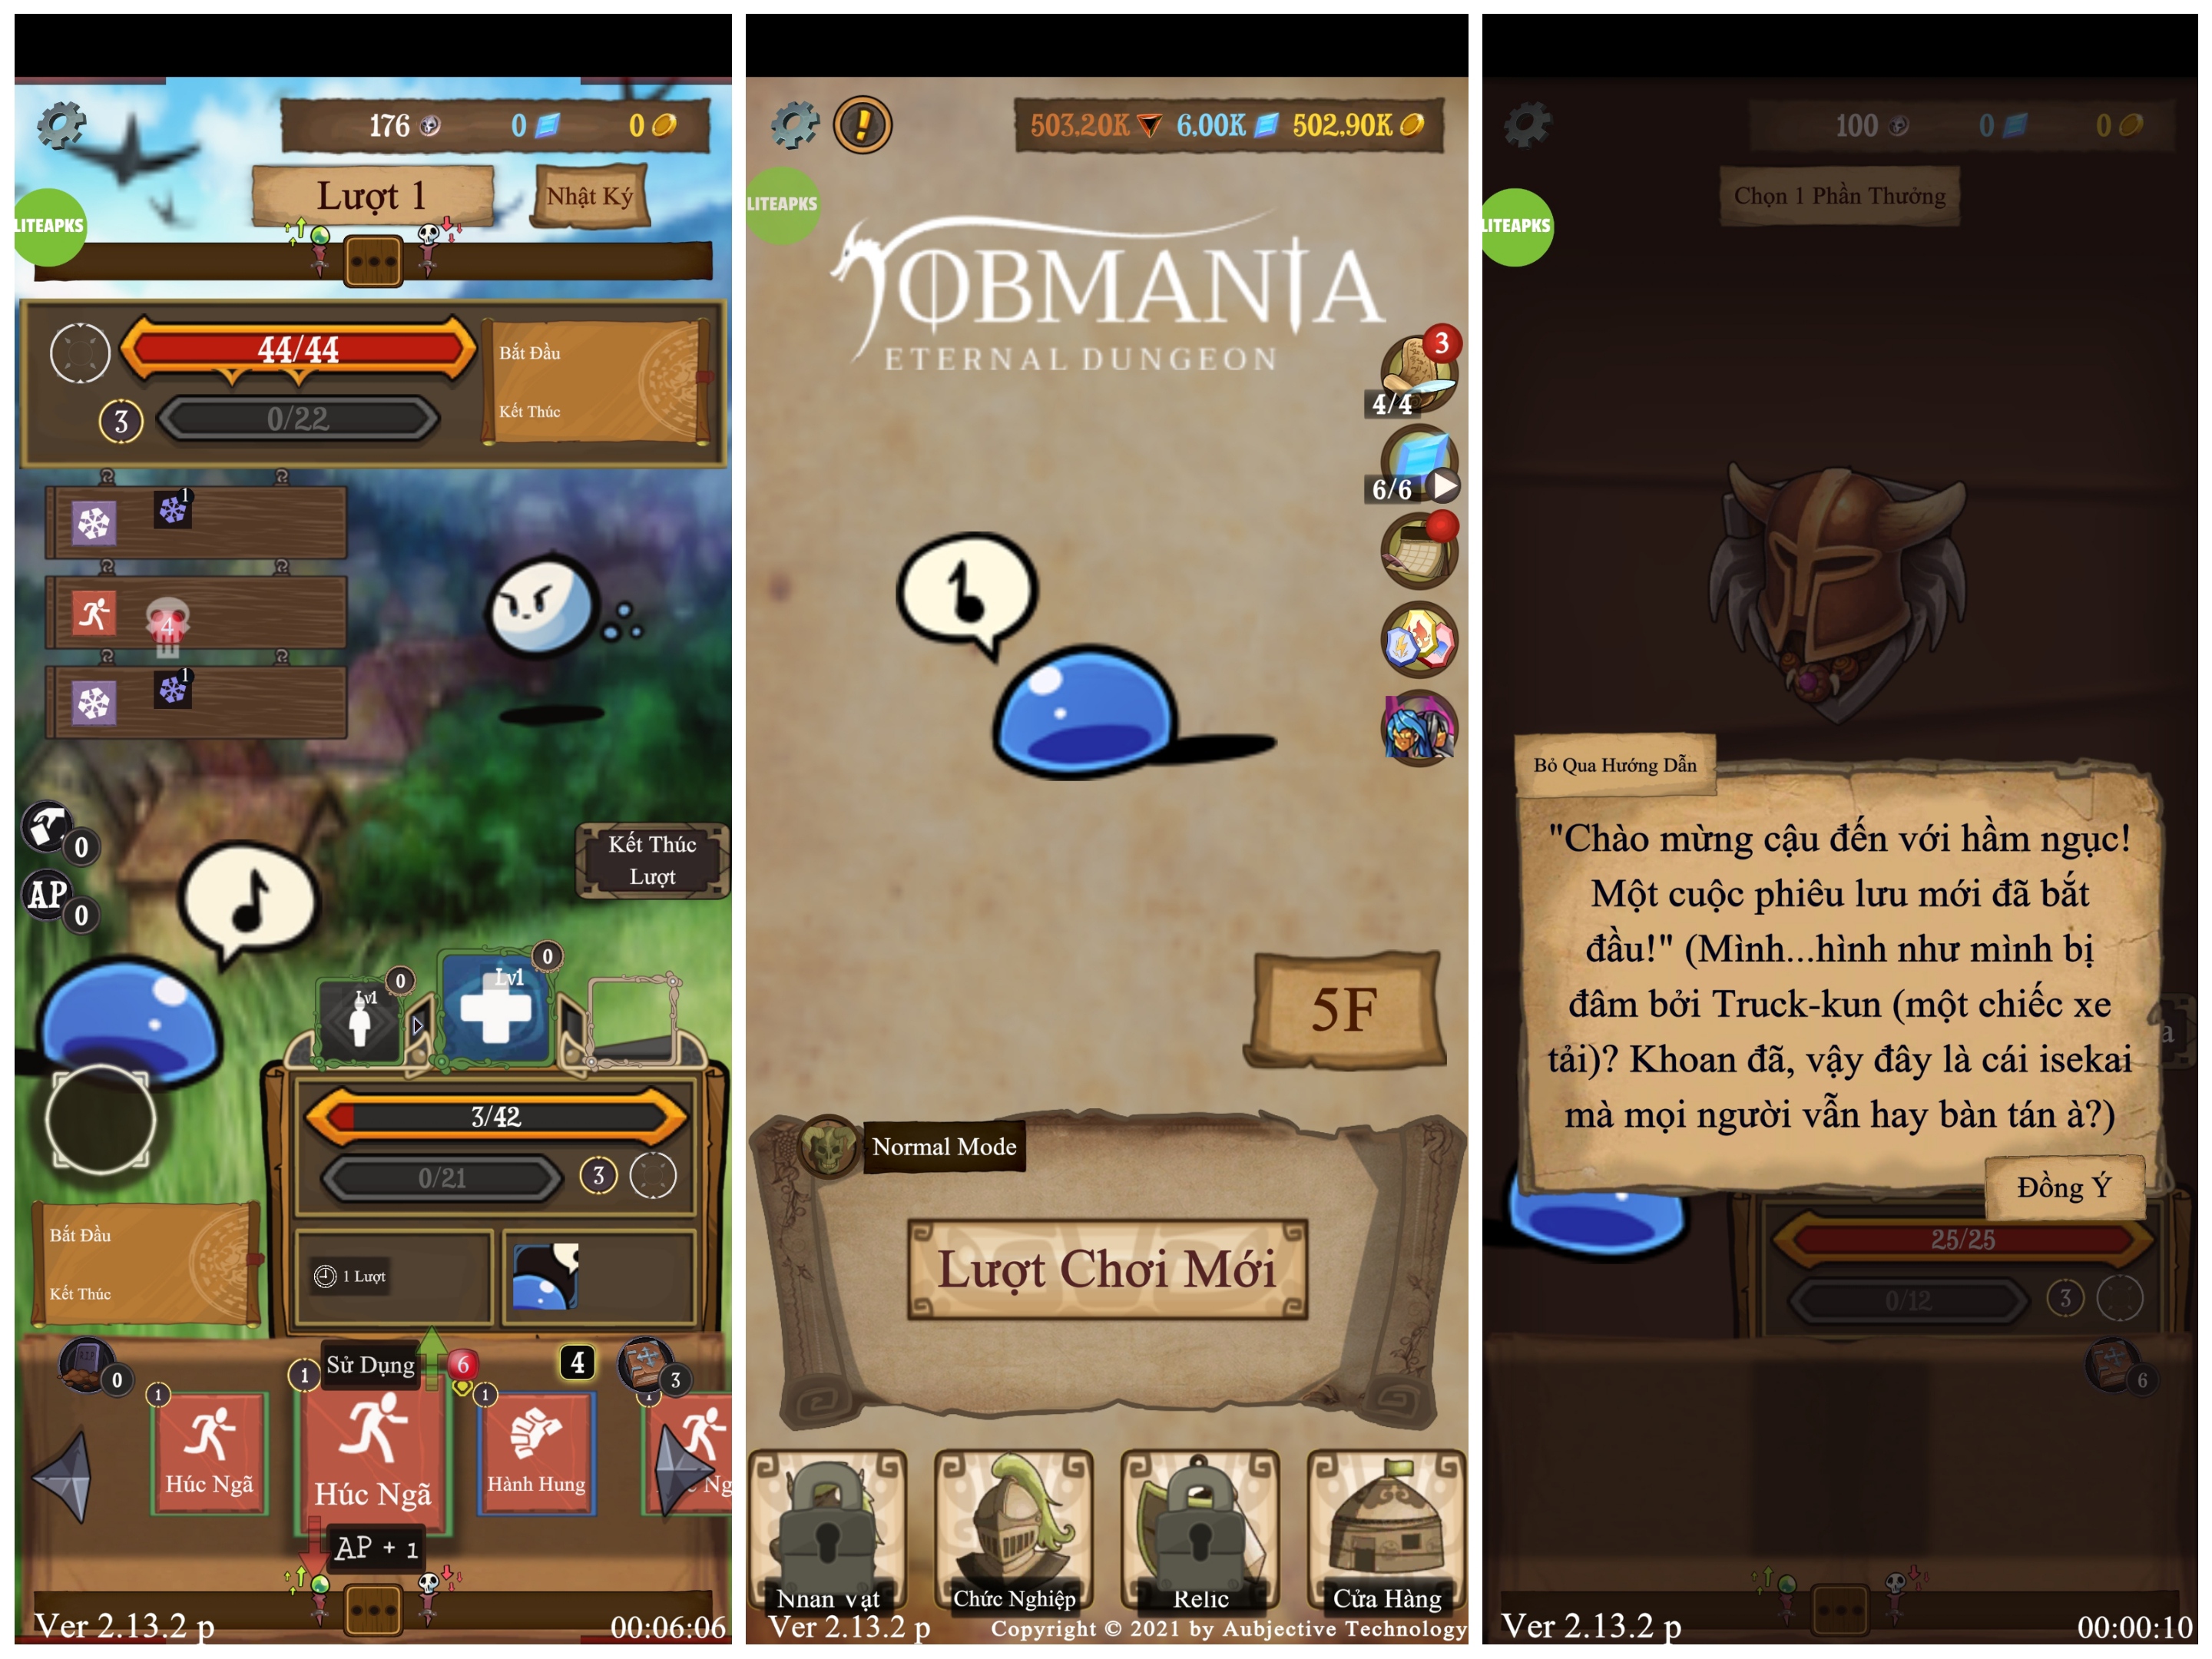 [Game Android] Jobmania - Eternal Dungeon Tiếng Việt